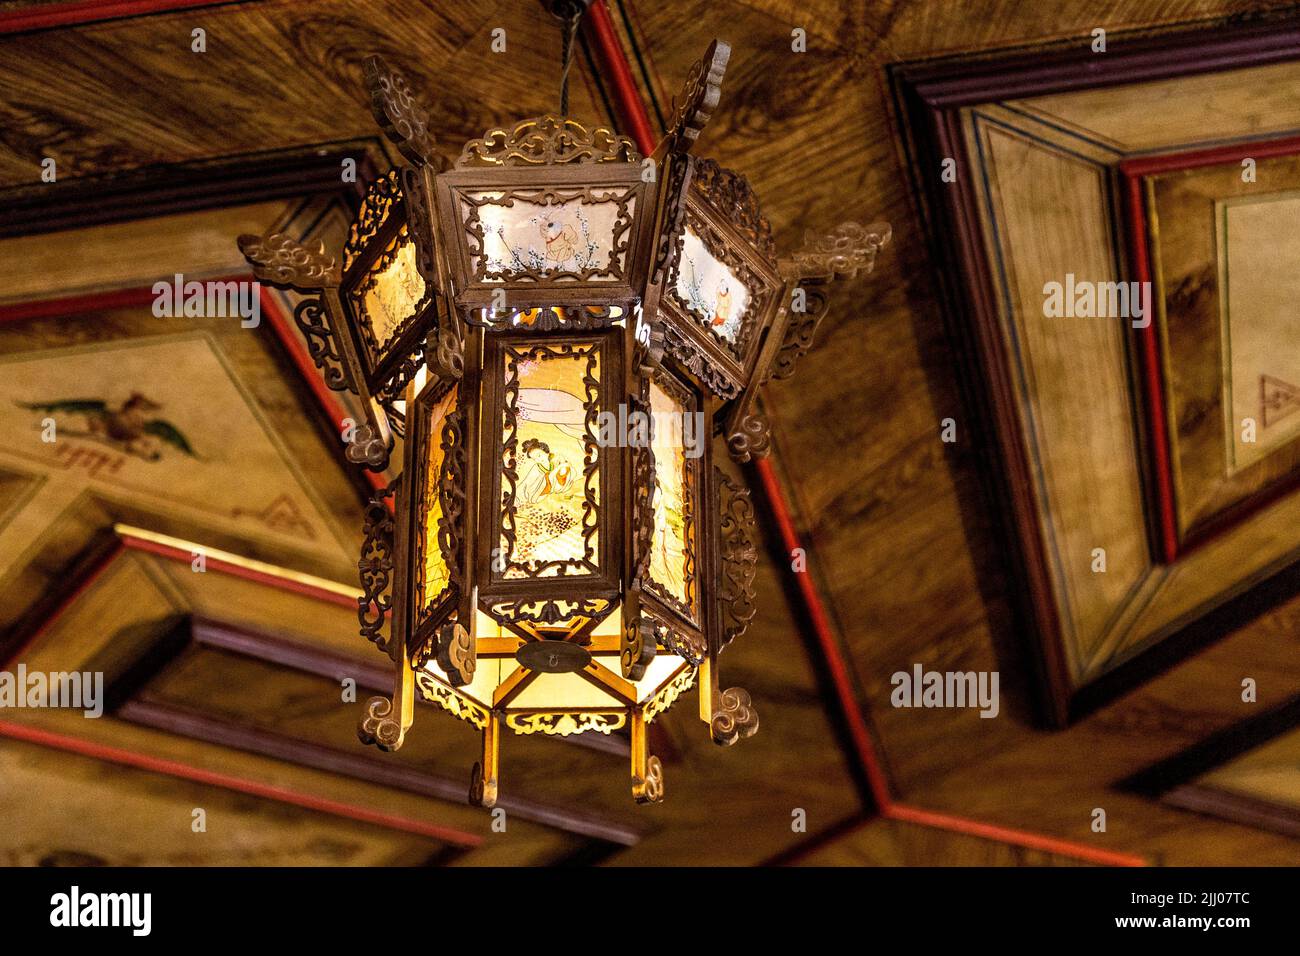 Oriental style ceiling lantern inside the Chinese Room at 17th century baroque royal Wilanow Palace, Warsaw, Poland Stock Photo